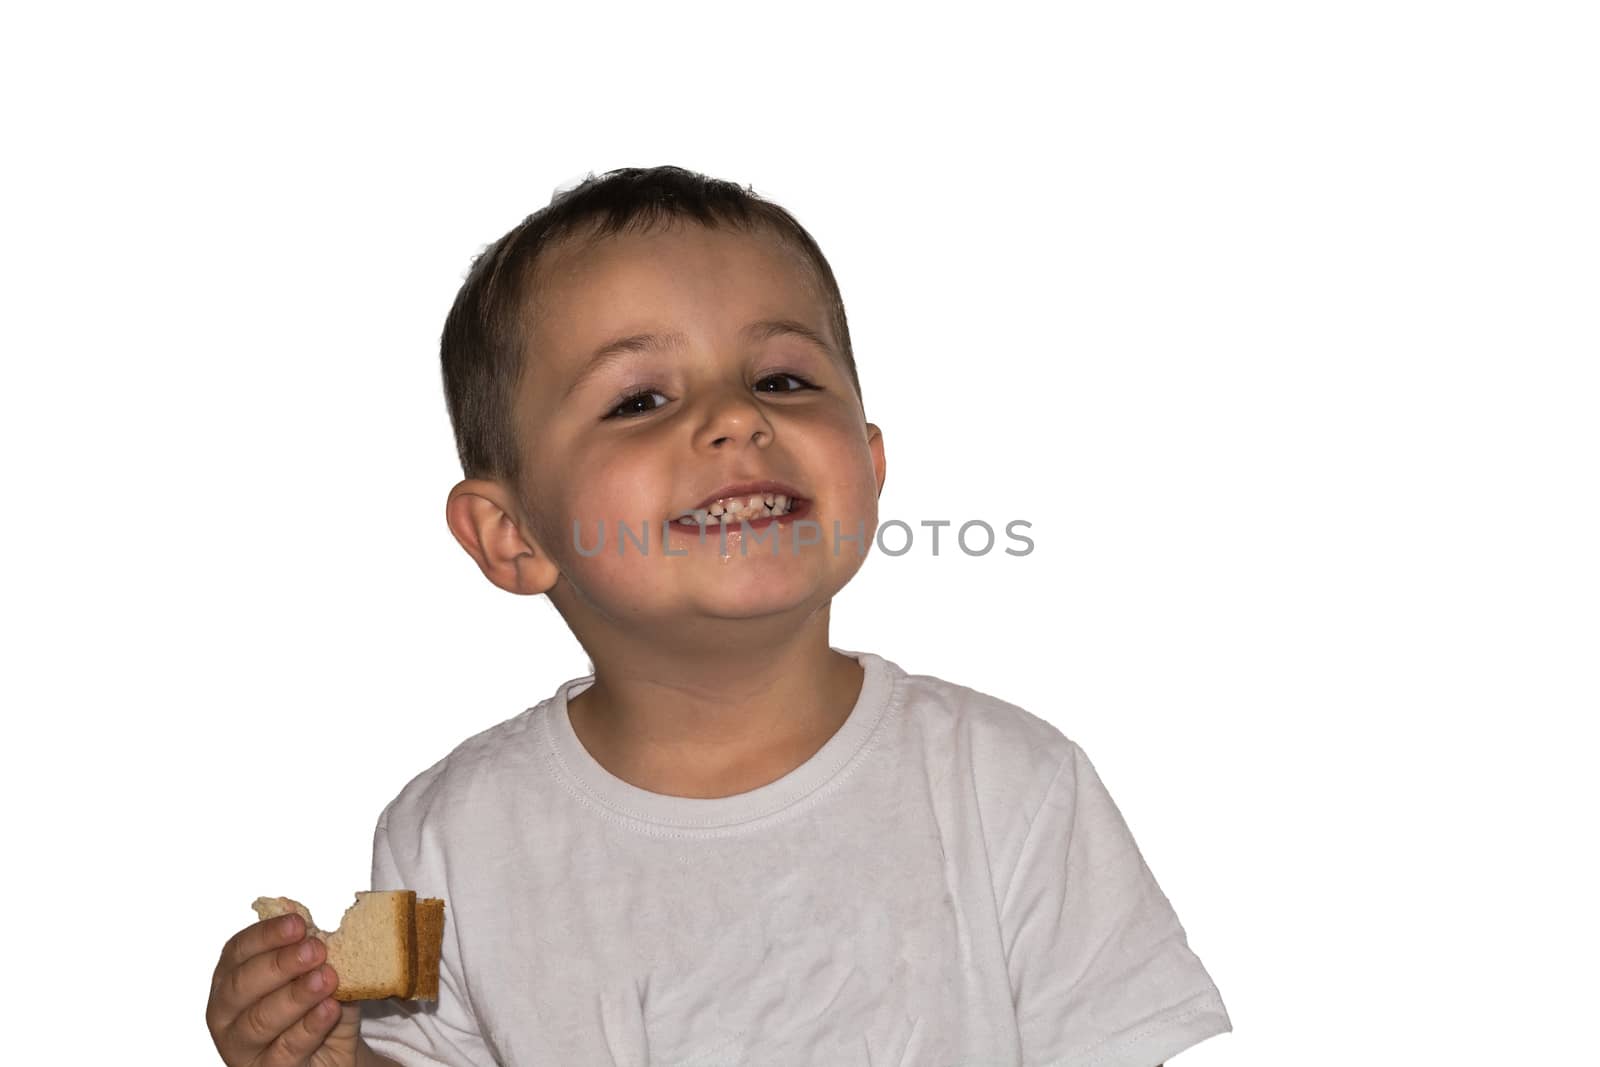 Little laughing boy with toast in hand is standing in front of a white background.